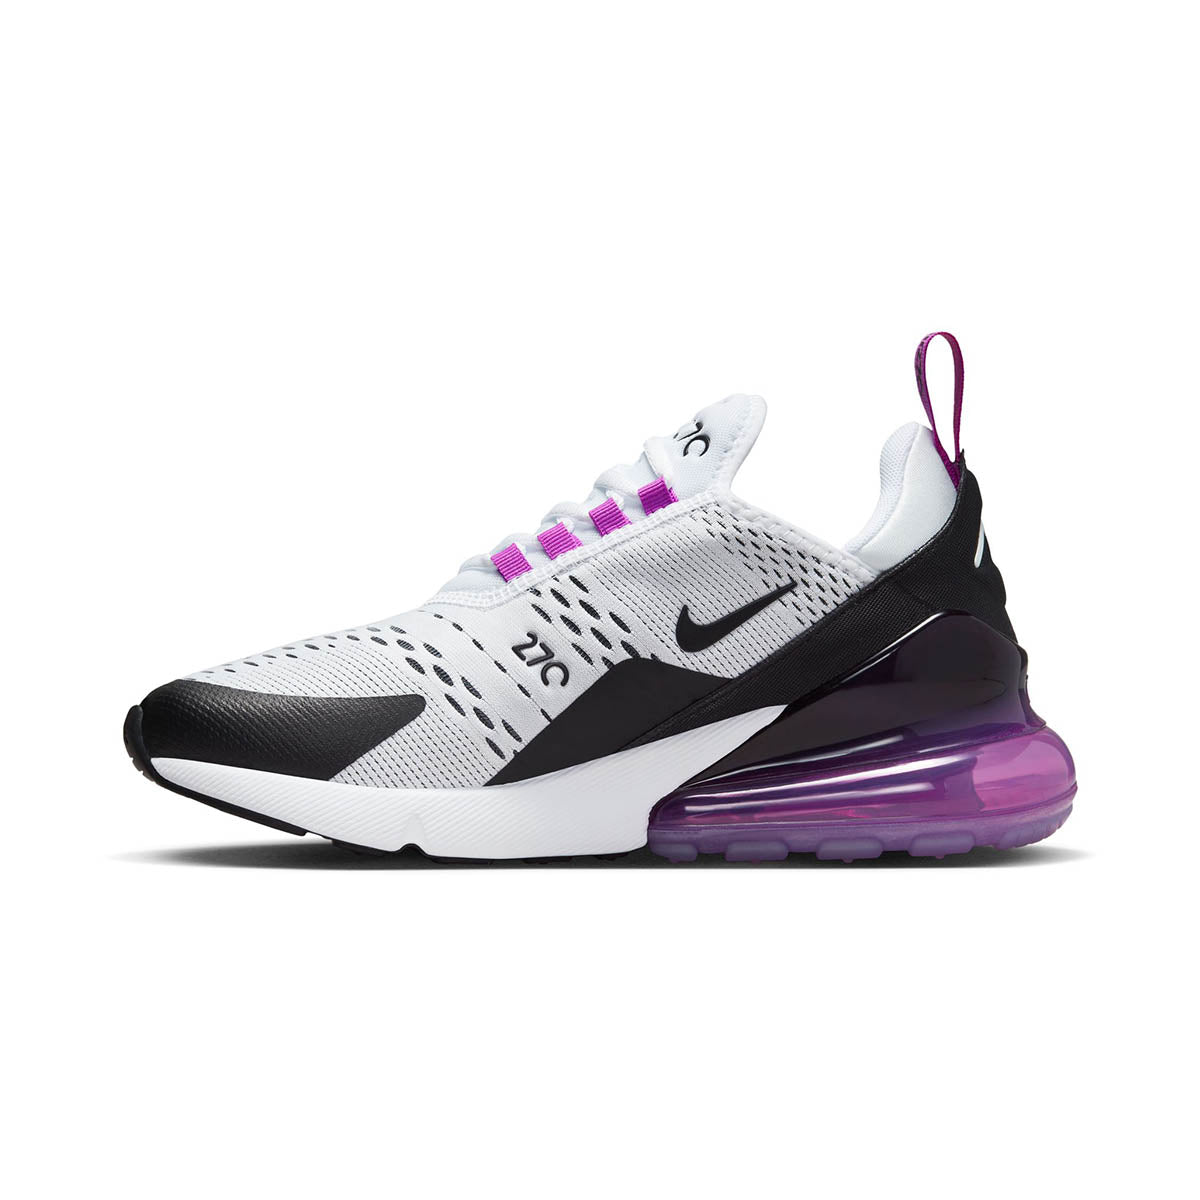 Nike Women's Air Max 270 Casual Shoes in Black/Black Size 6.5